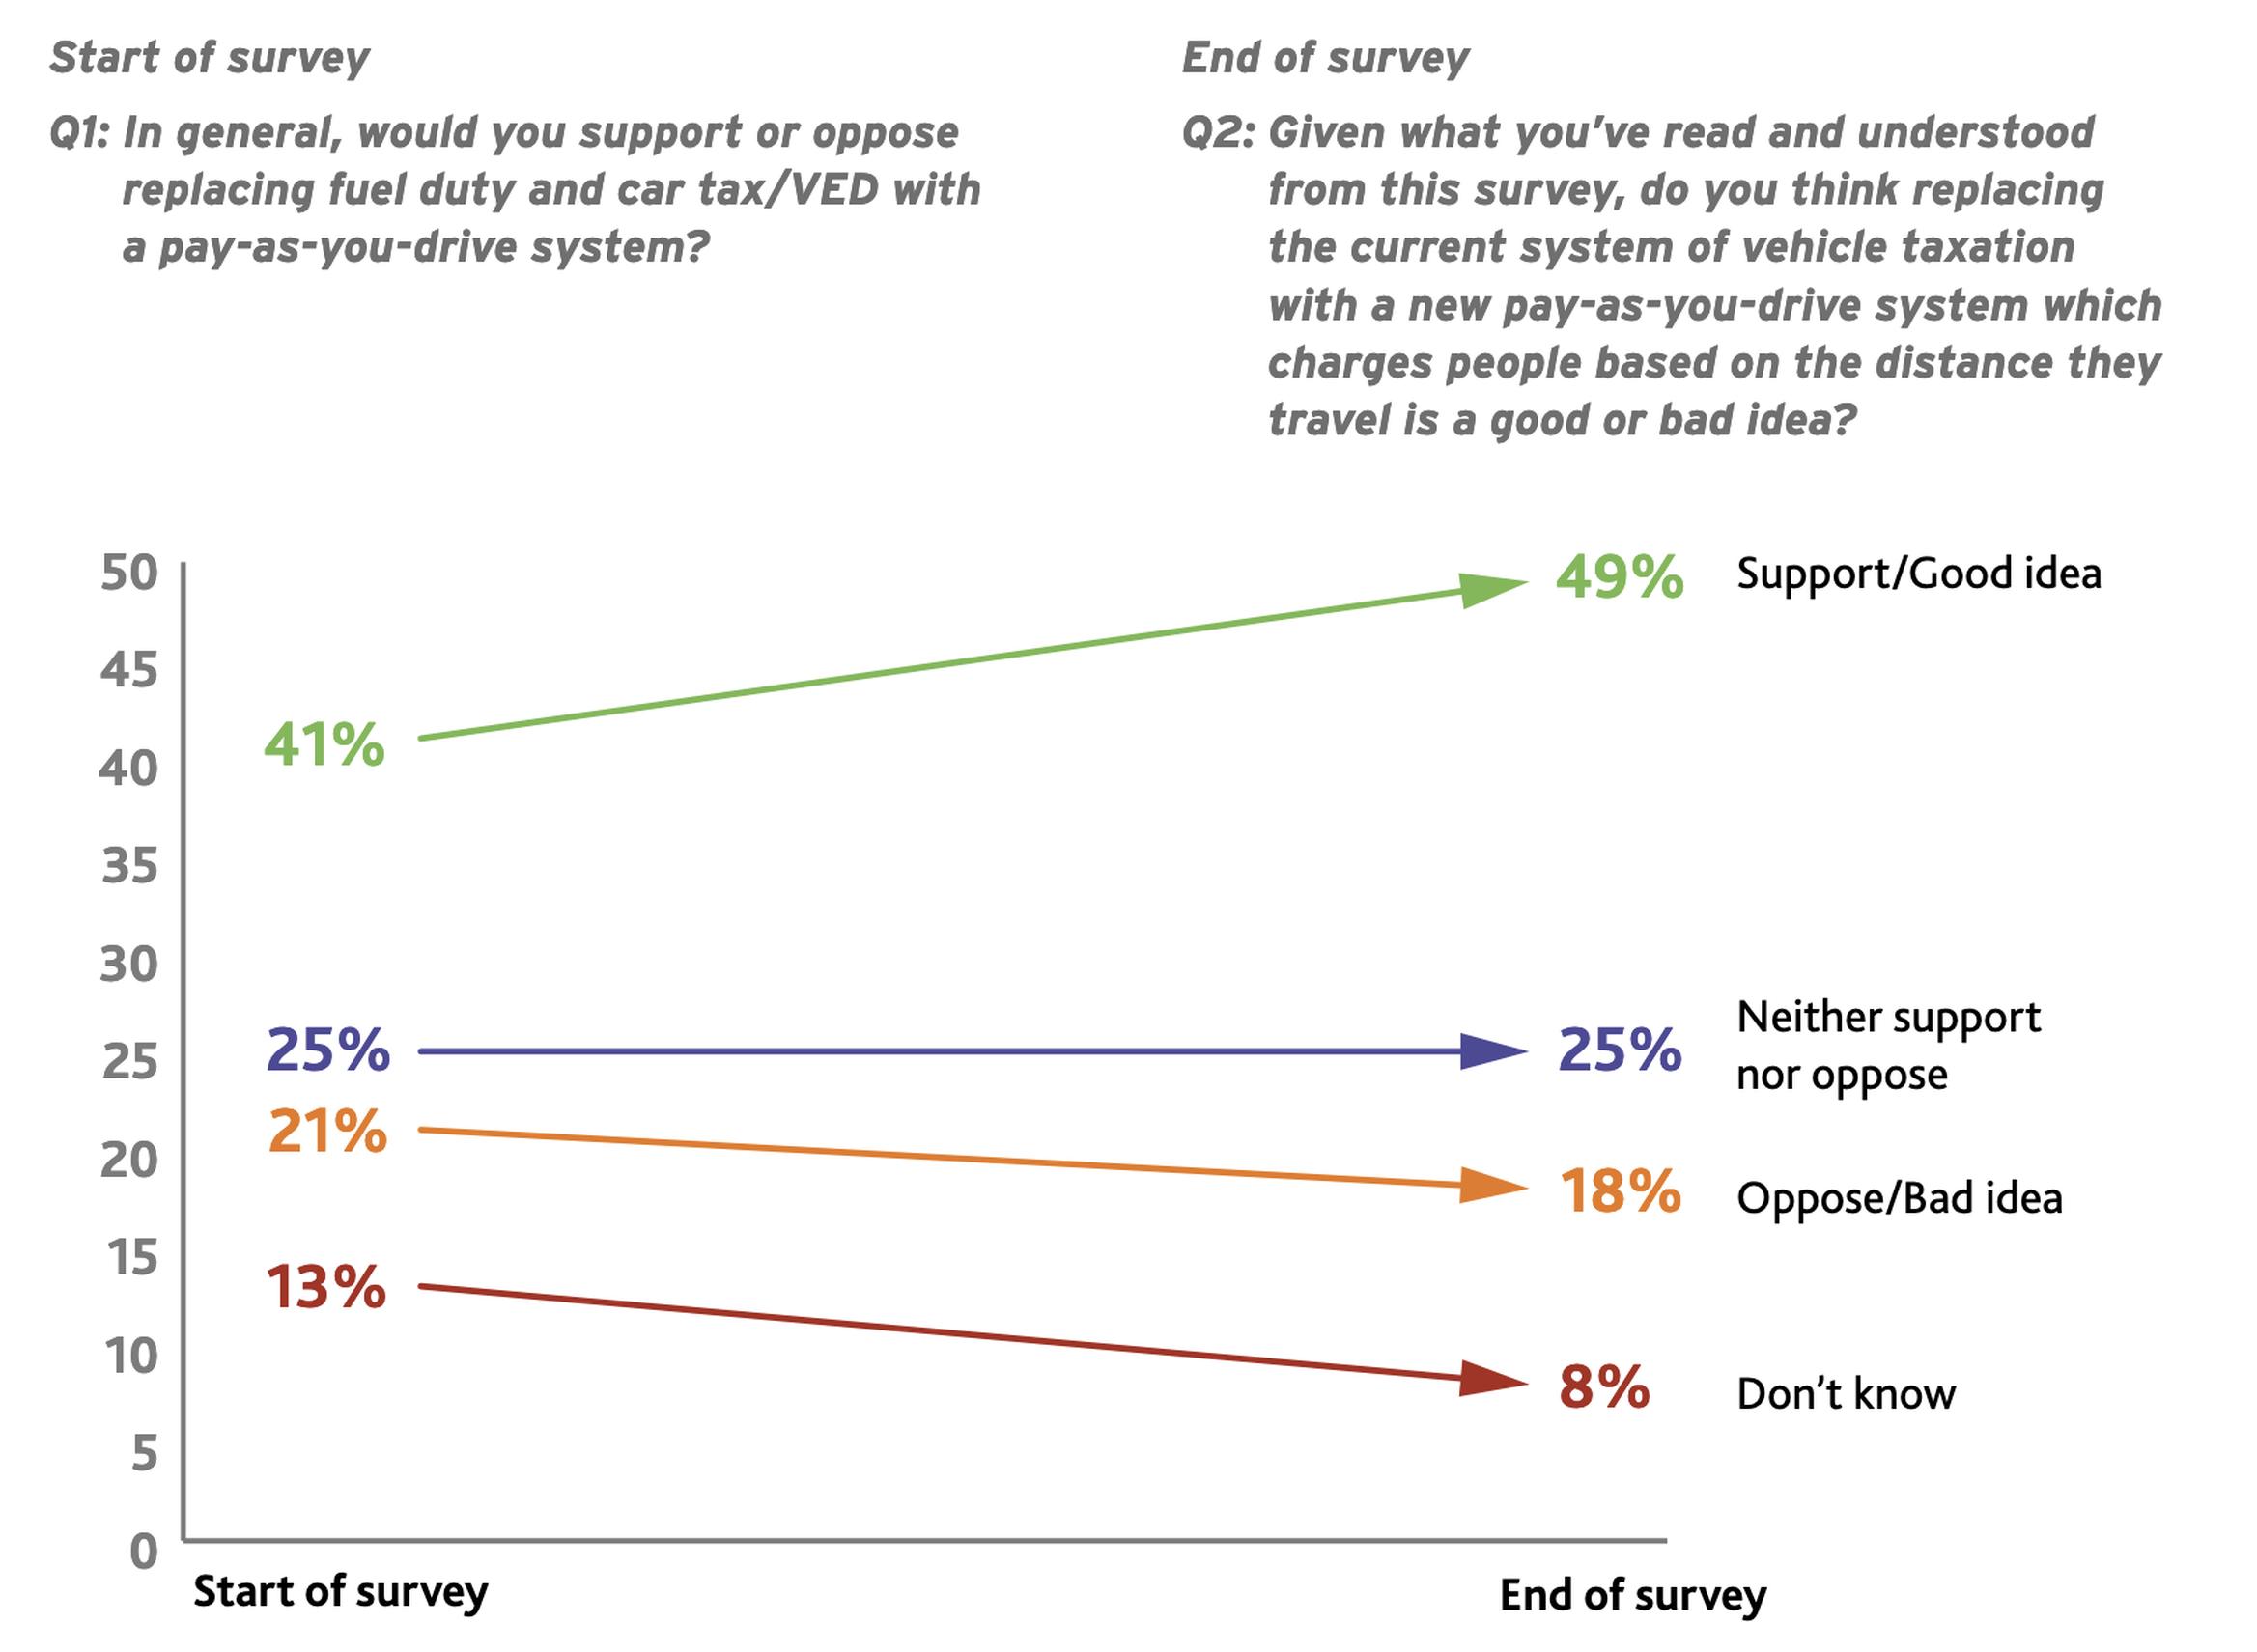 Change in support for replacing the current system of vehicle taxation with pay-as-you-drive road pricing